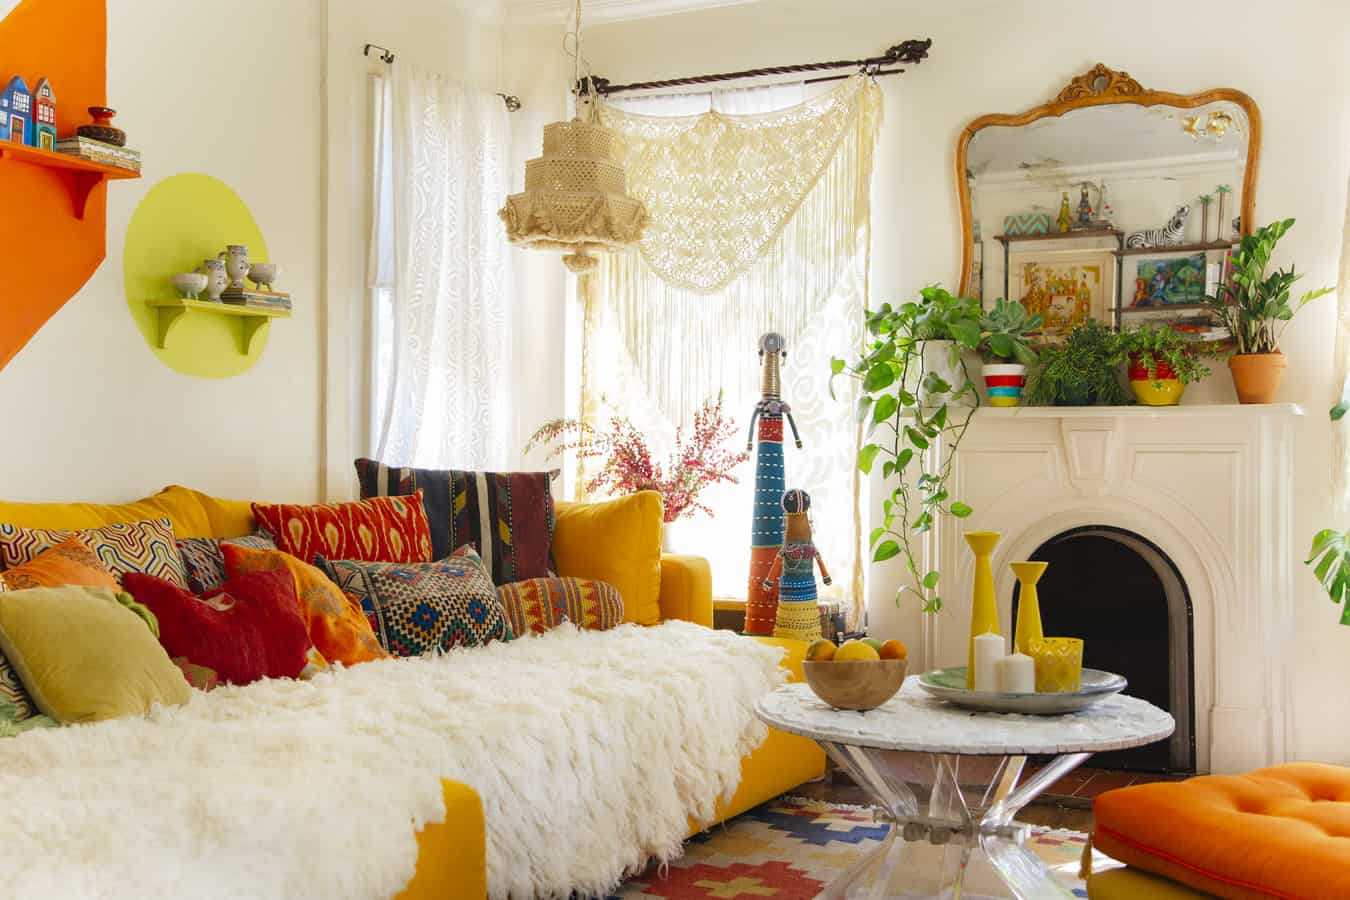 Bohemian decor style full of color